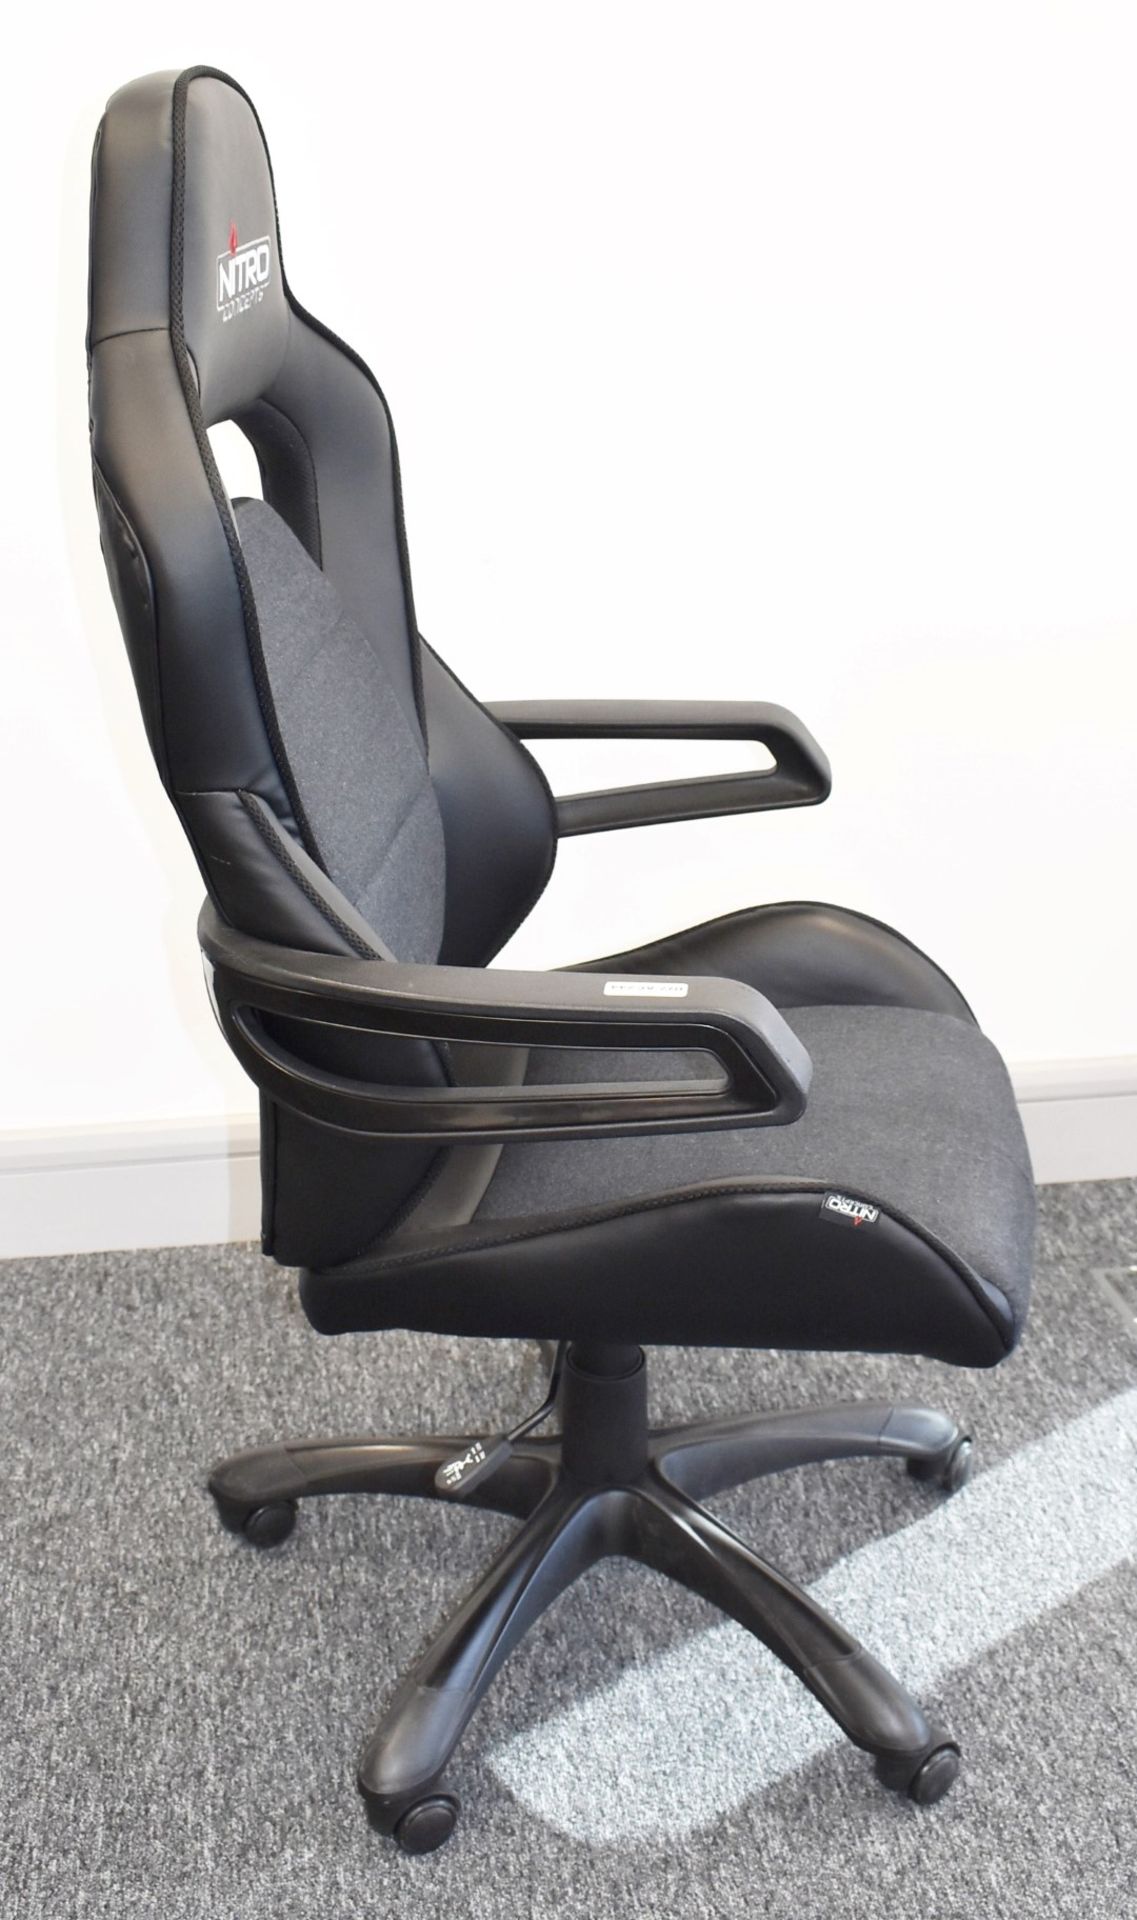 1 x Nitro Concepts Evo Gaming Swivel Chair - Faux Leather and Fabric Upholstery in Black - Image 6 of 9